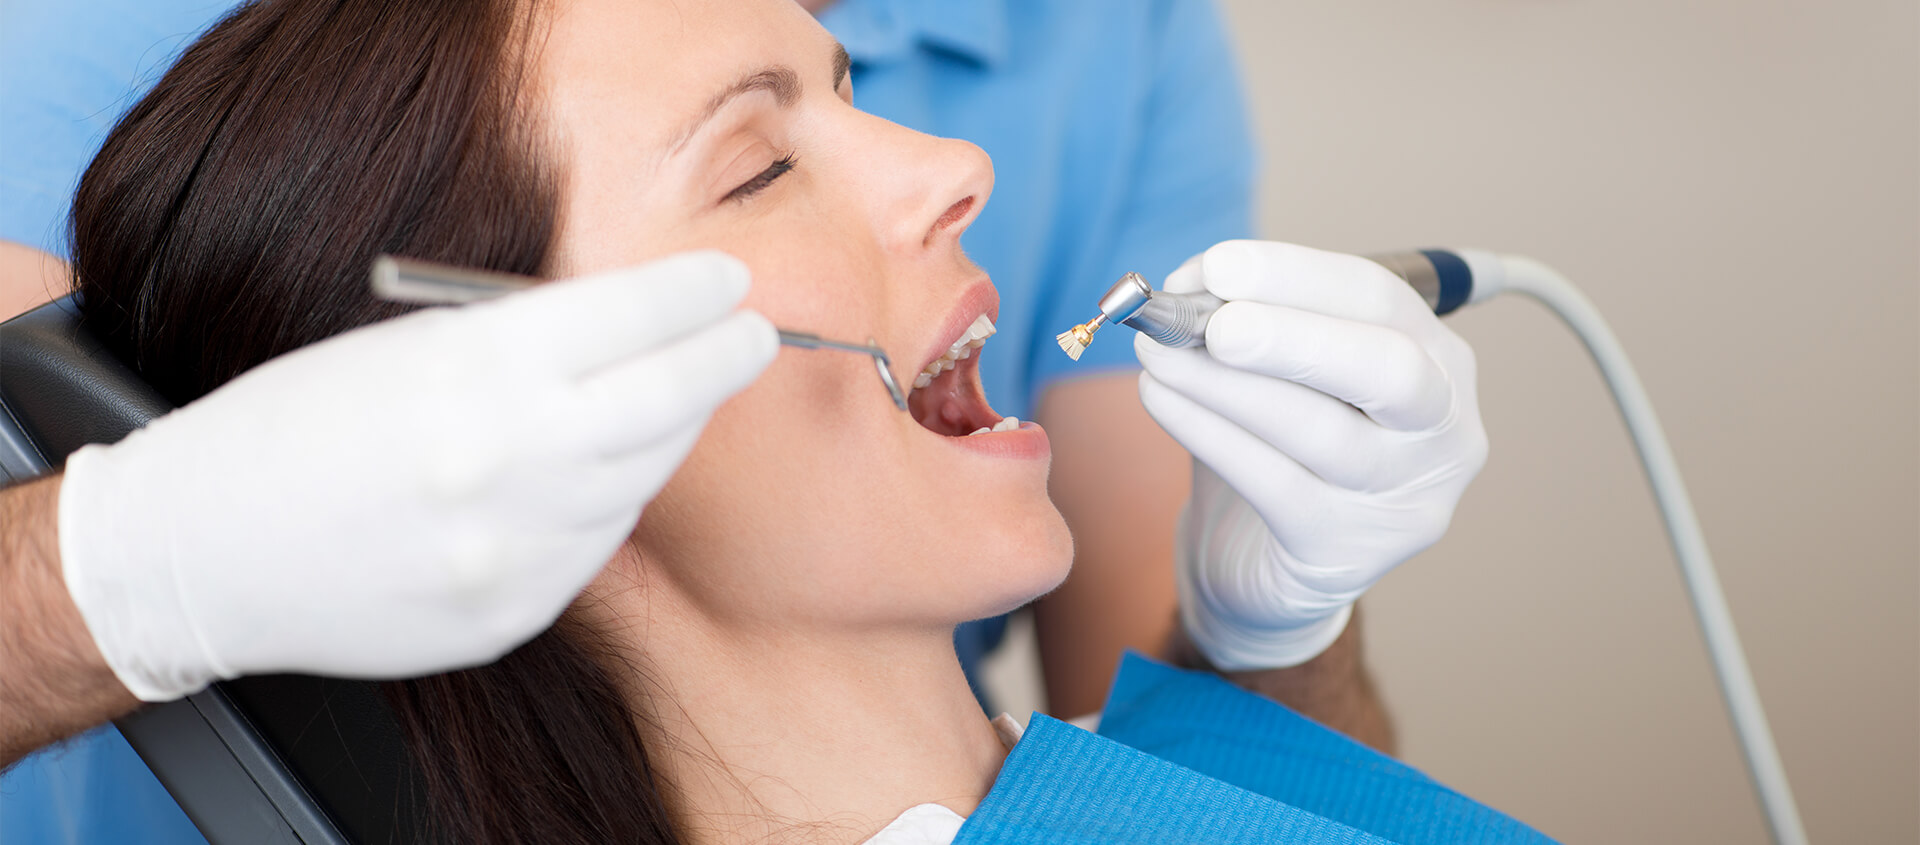 Conscious Sedation for Dental Work in Middletown IN Area